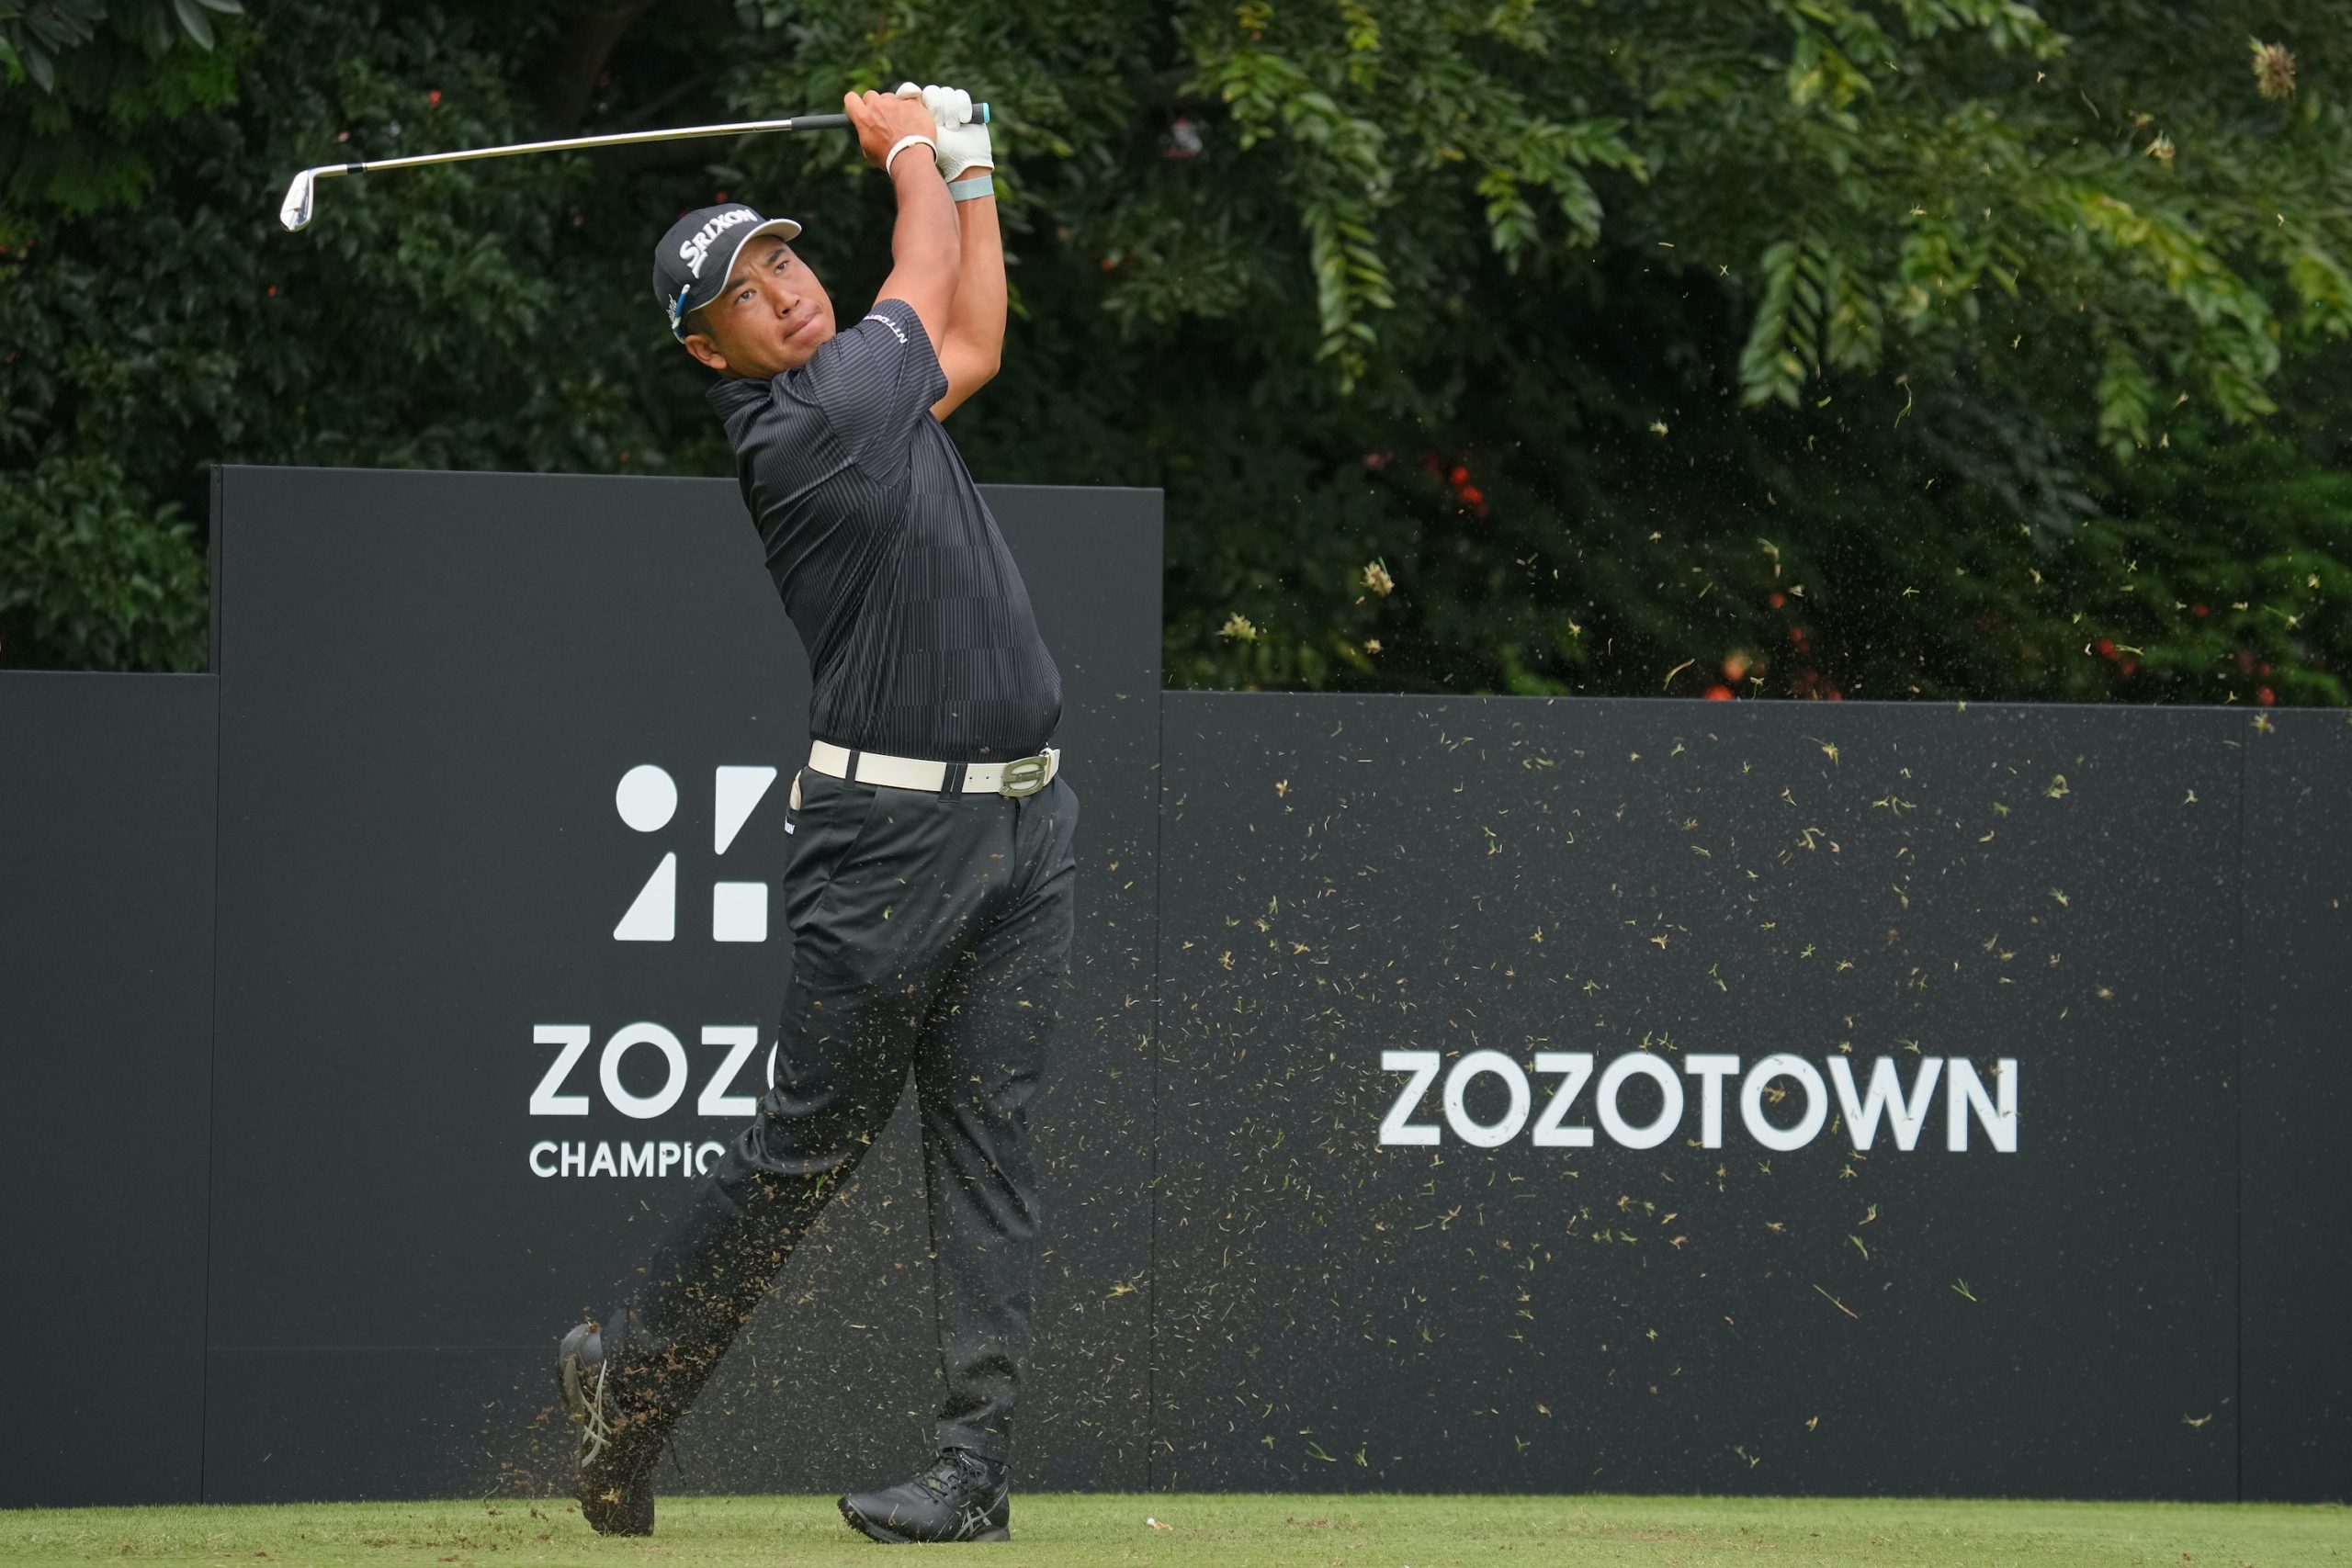 Matsuyama excited ahead of Zozo as other local stars eye success at Zozo